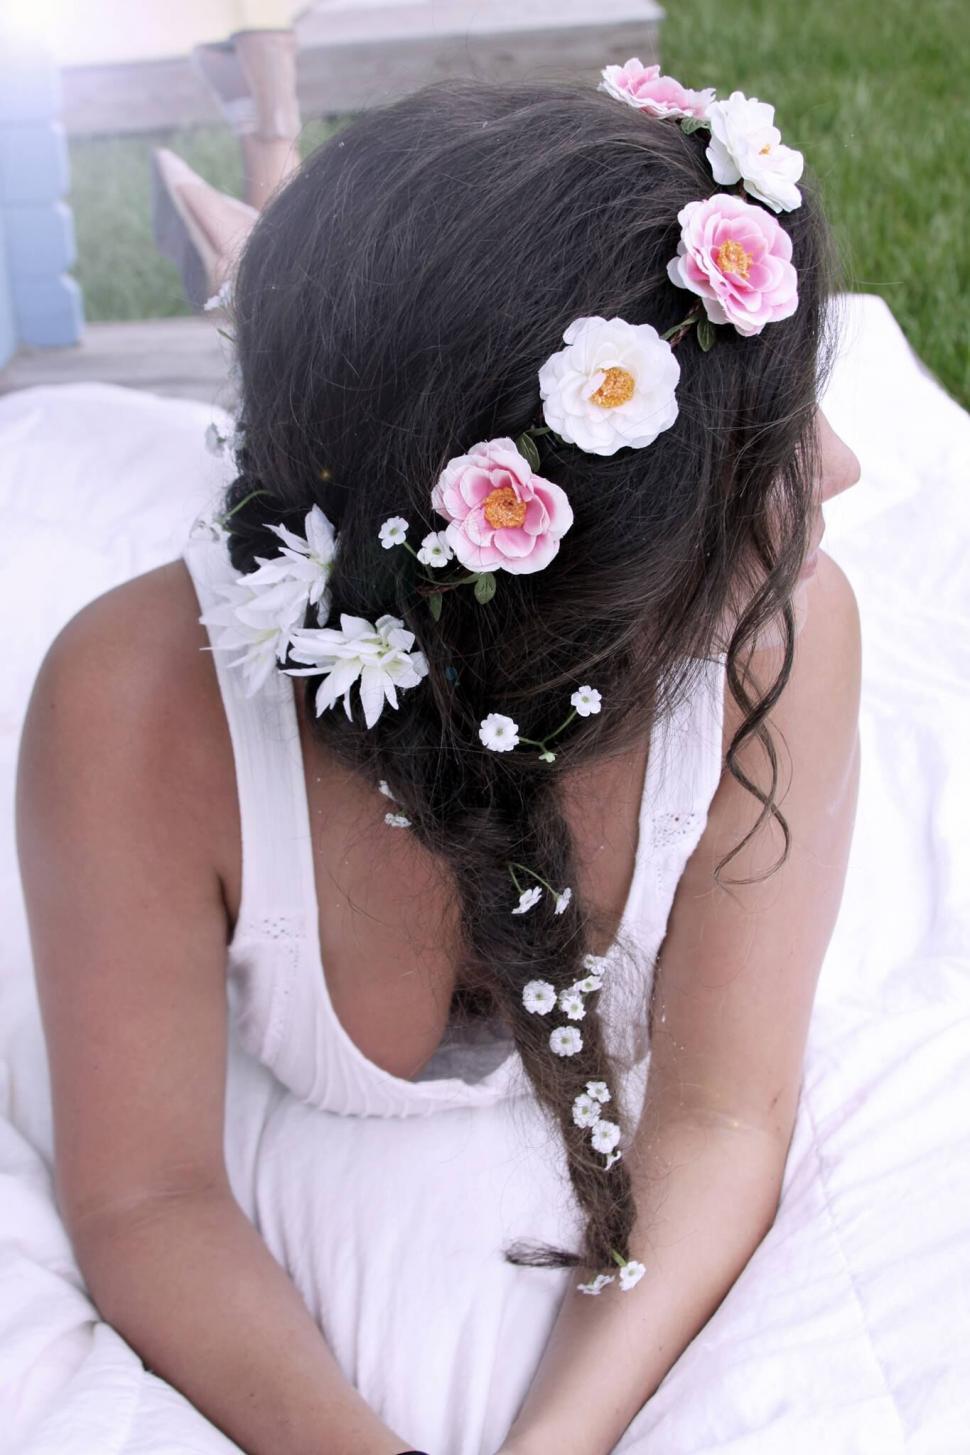 Free Image of Woman with flowers in braided hair 